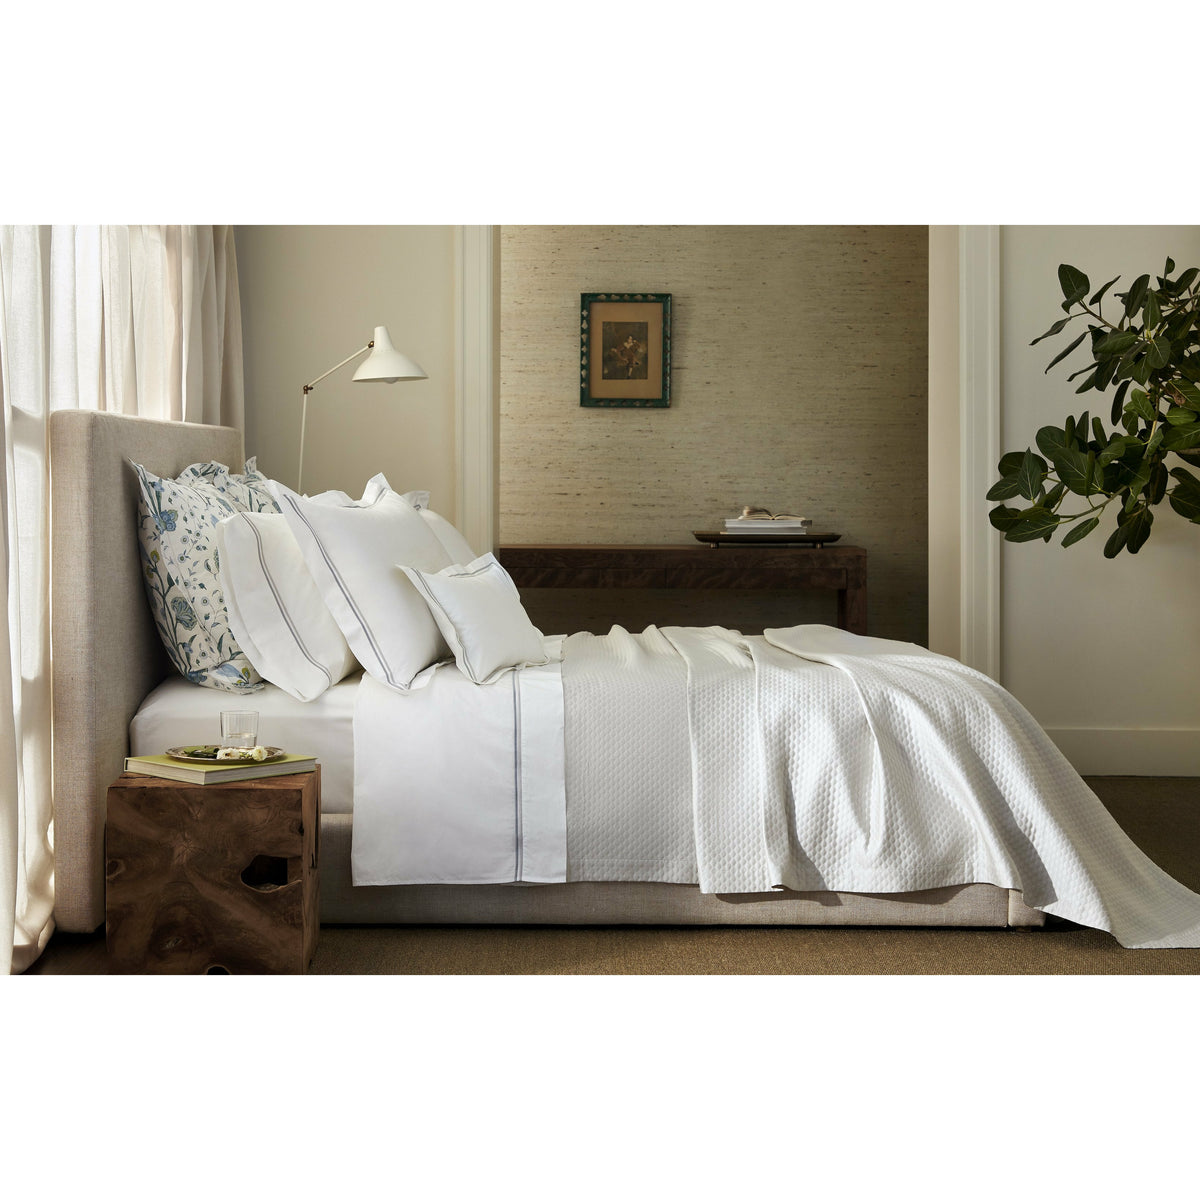 Matouk Essex Pearl Coordinate High End Bed Sheet Sets